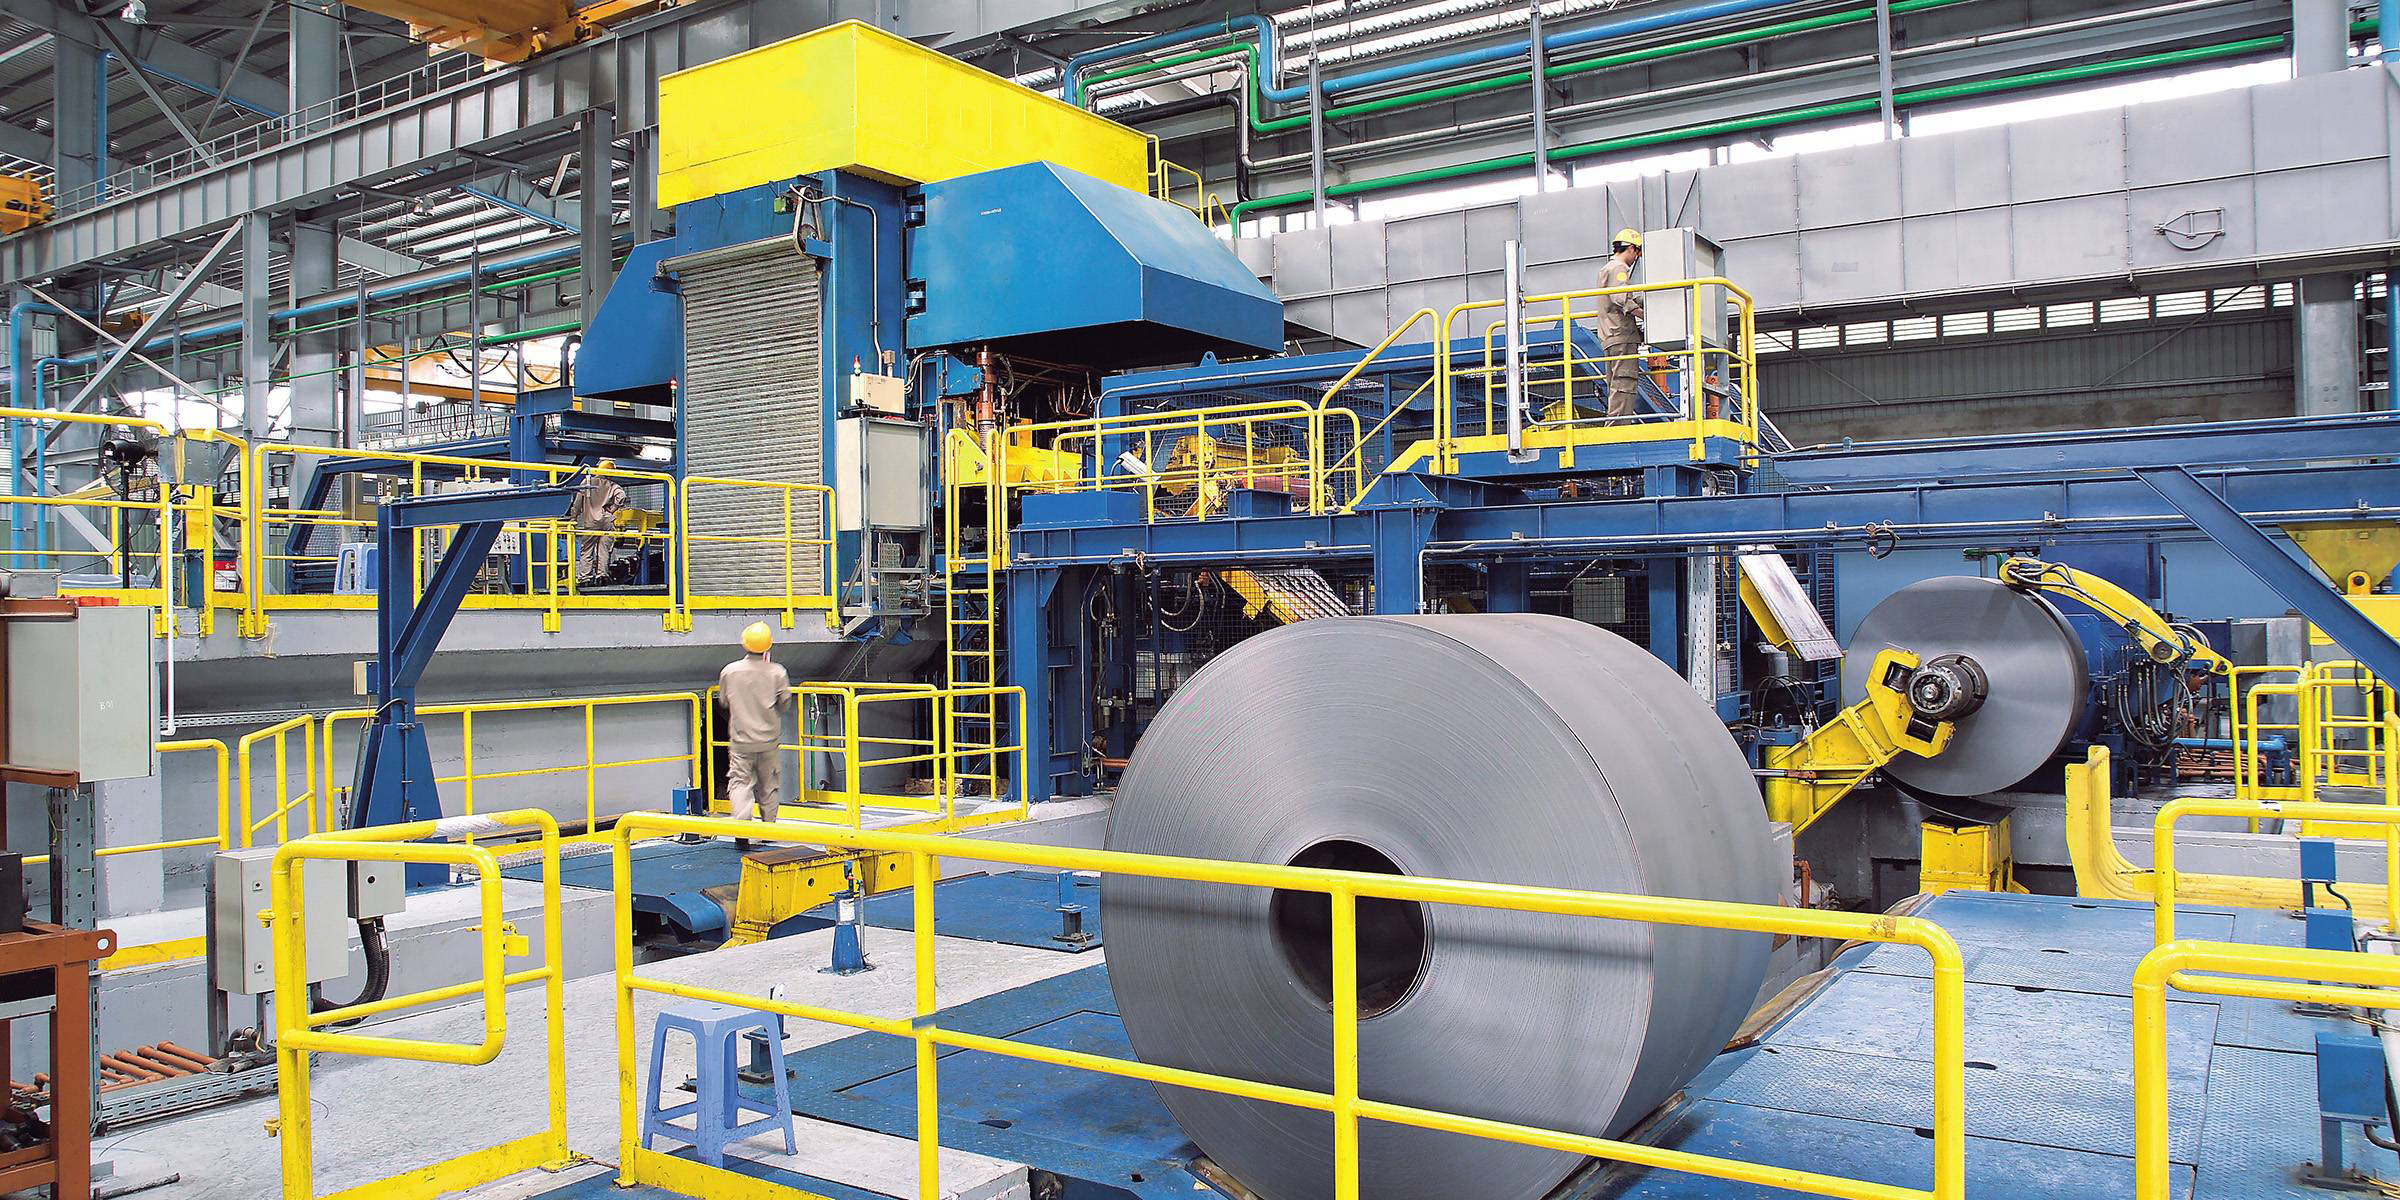 LONGSTANDING EXPERIENCE AS A LEADING SUPPLIER OF COLD-ROLLING MILLS